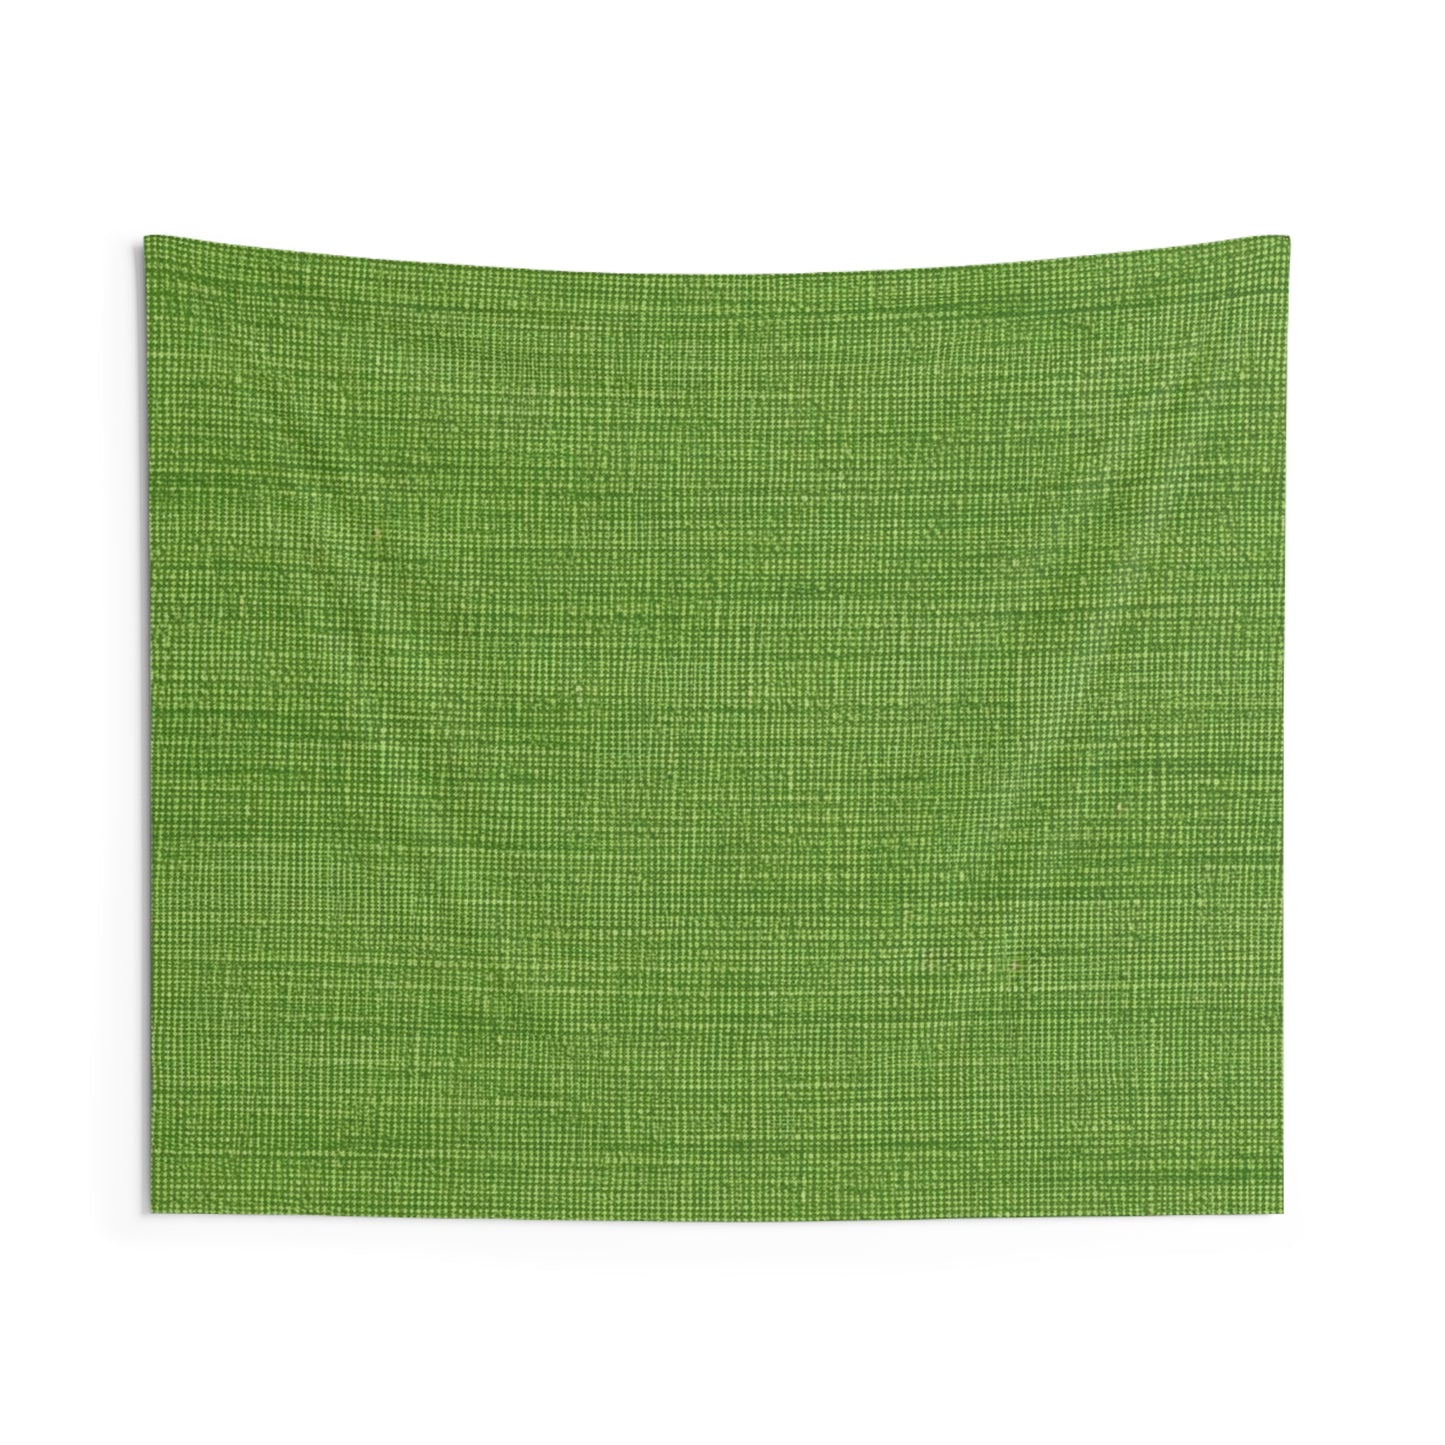 Olive Green Denim-Style: Seamless, Textured Fabric - Indoor Wall Tapestries